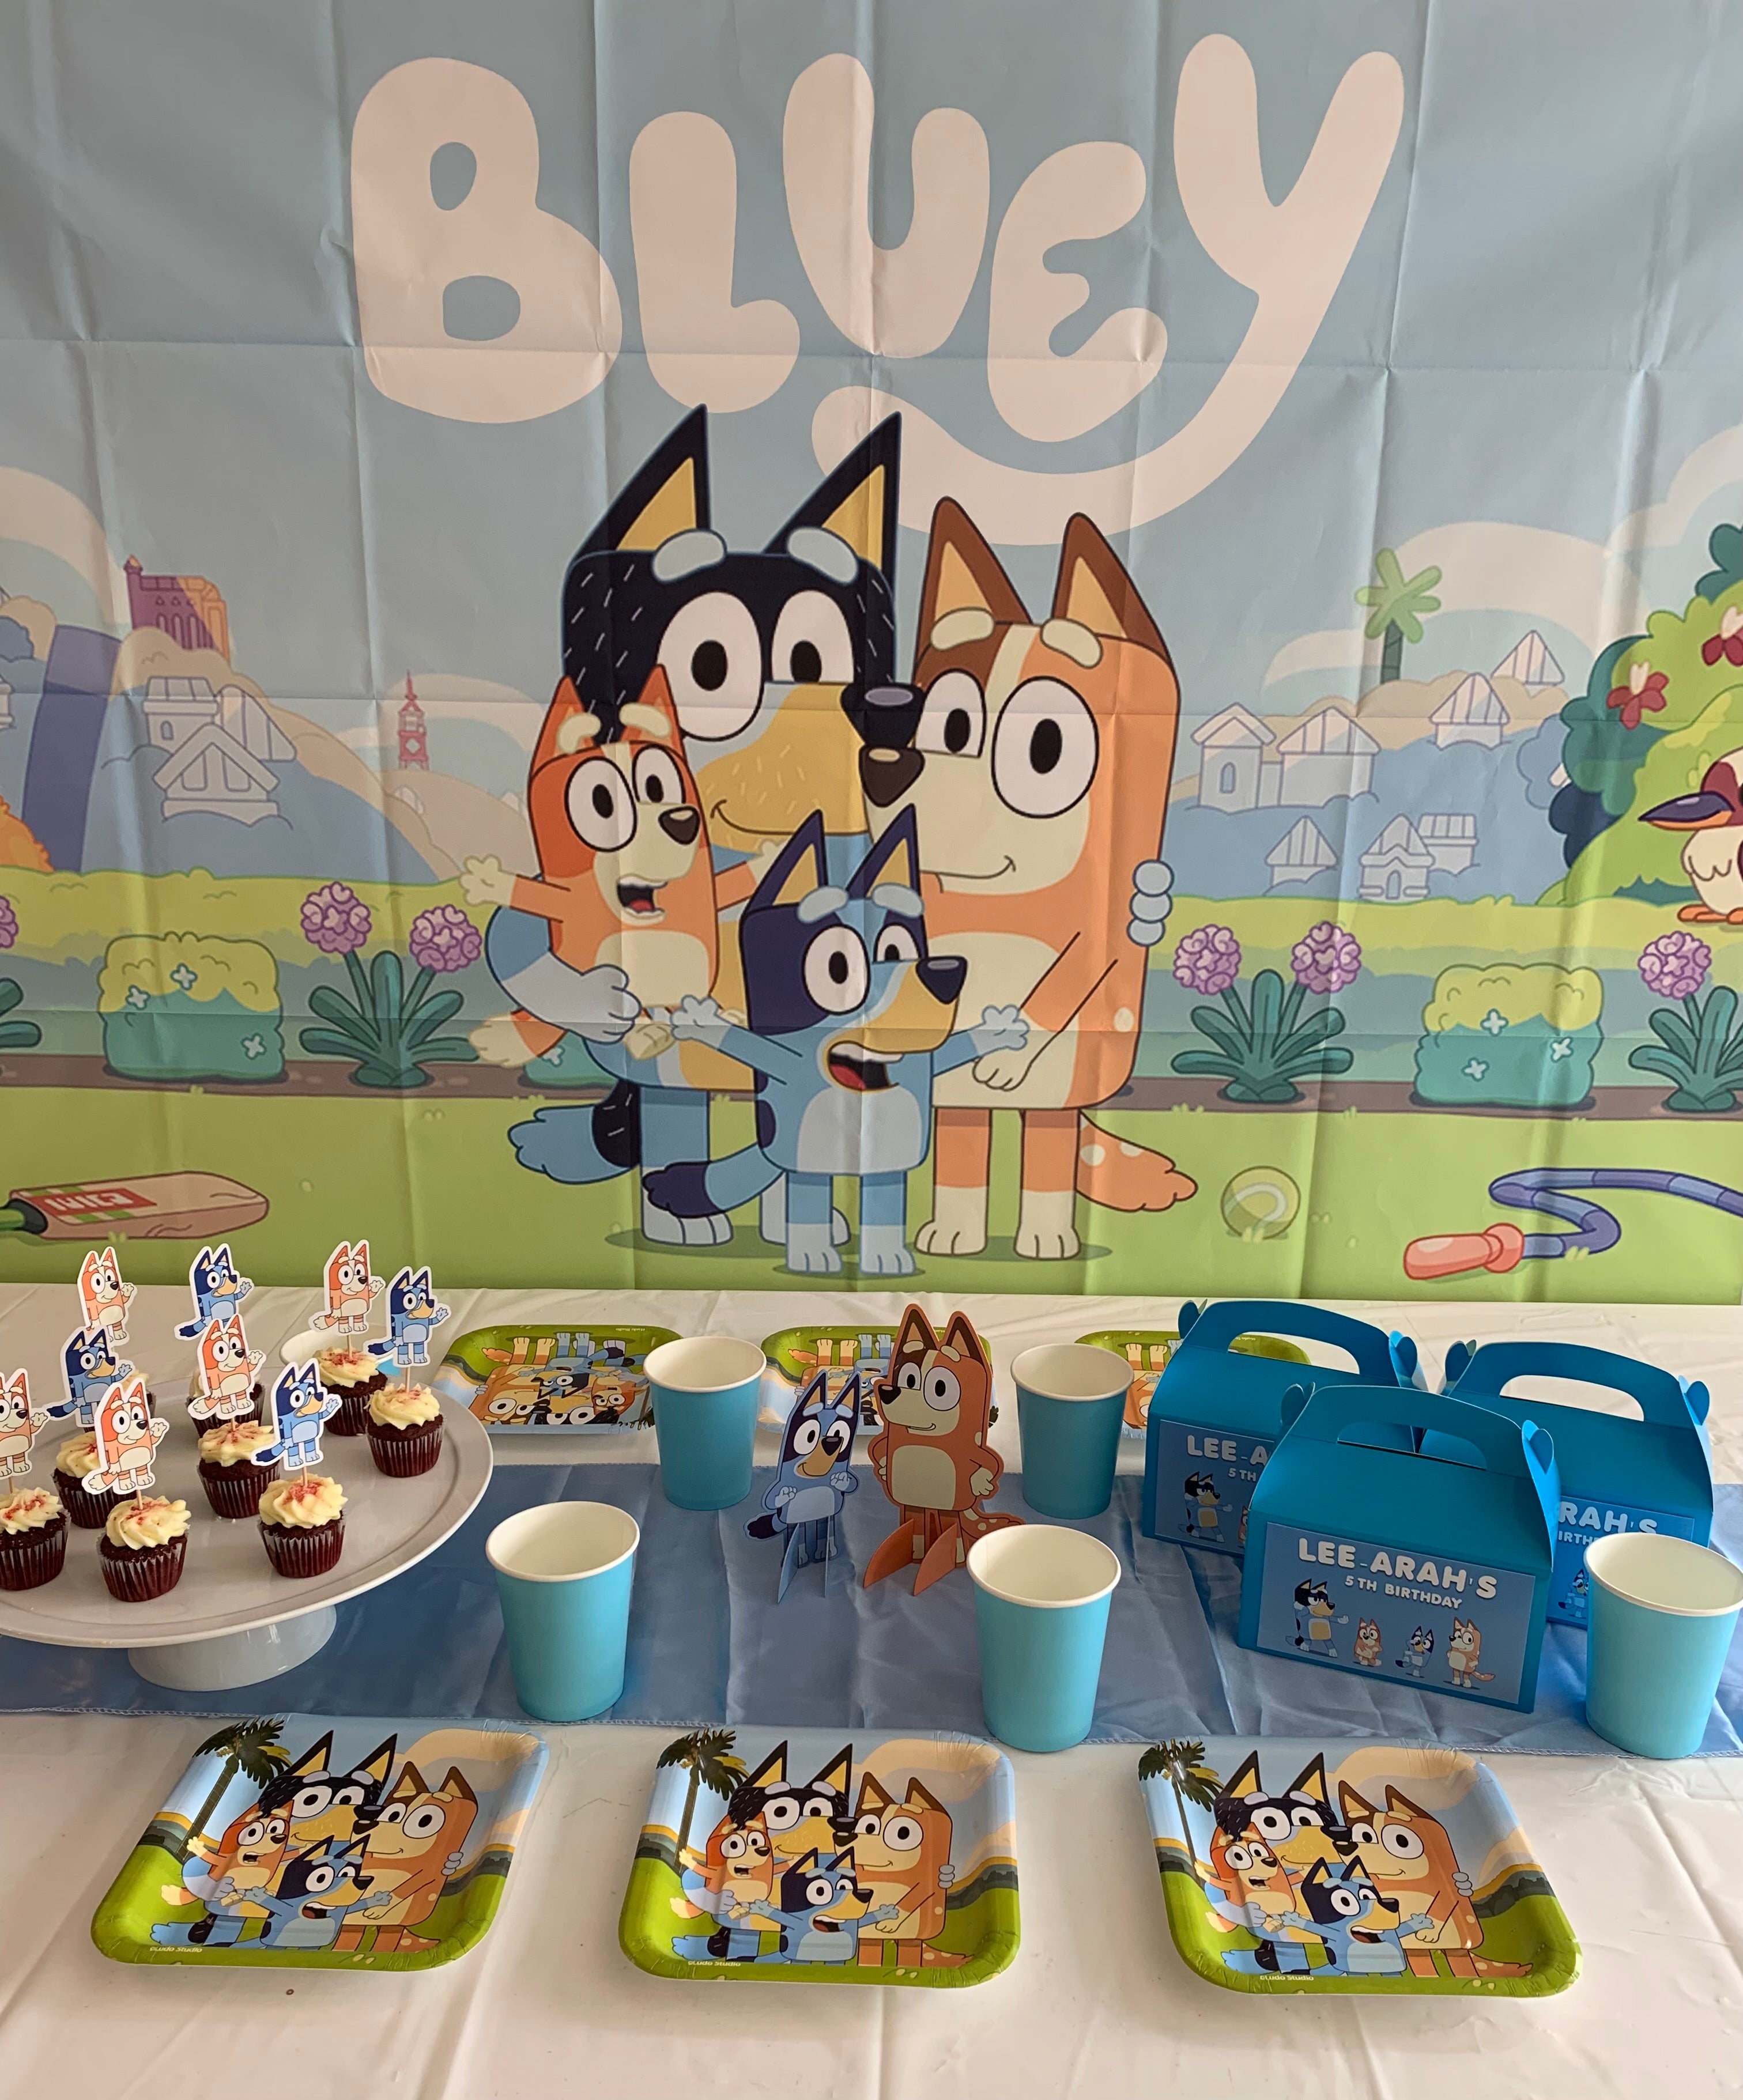 Make Your Own Bluey And Bingo Balloons At Home  2nd birthday party themes,  6th birthday parties, Birthday party themes